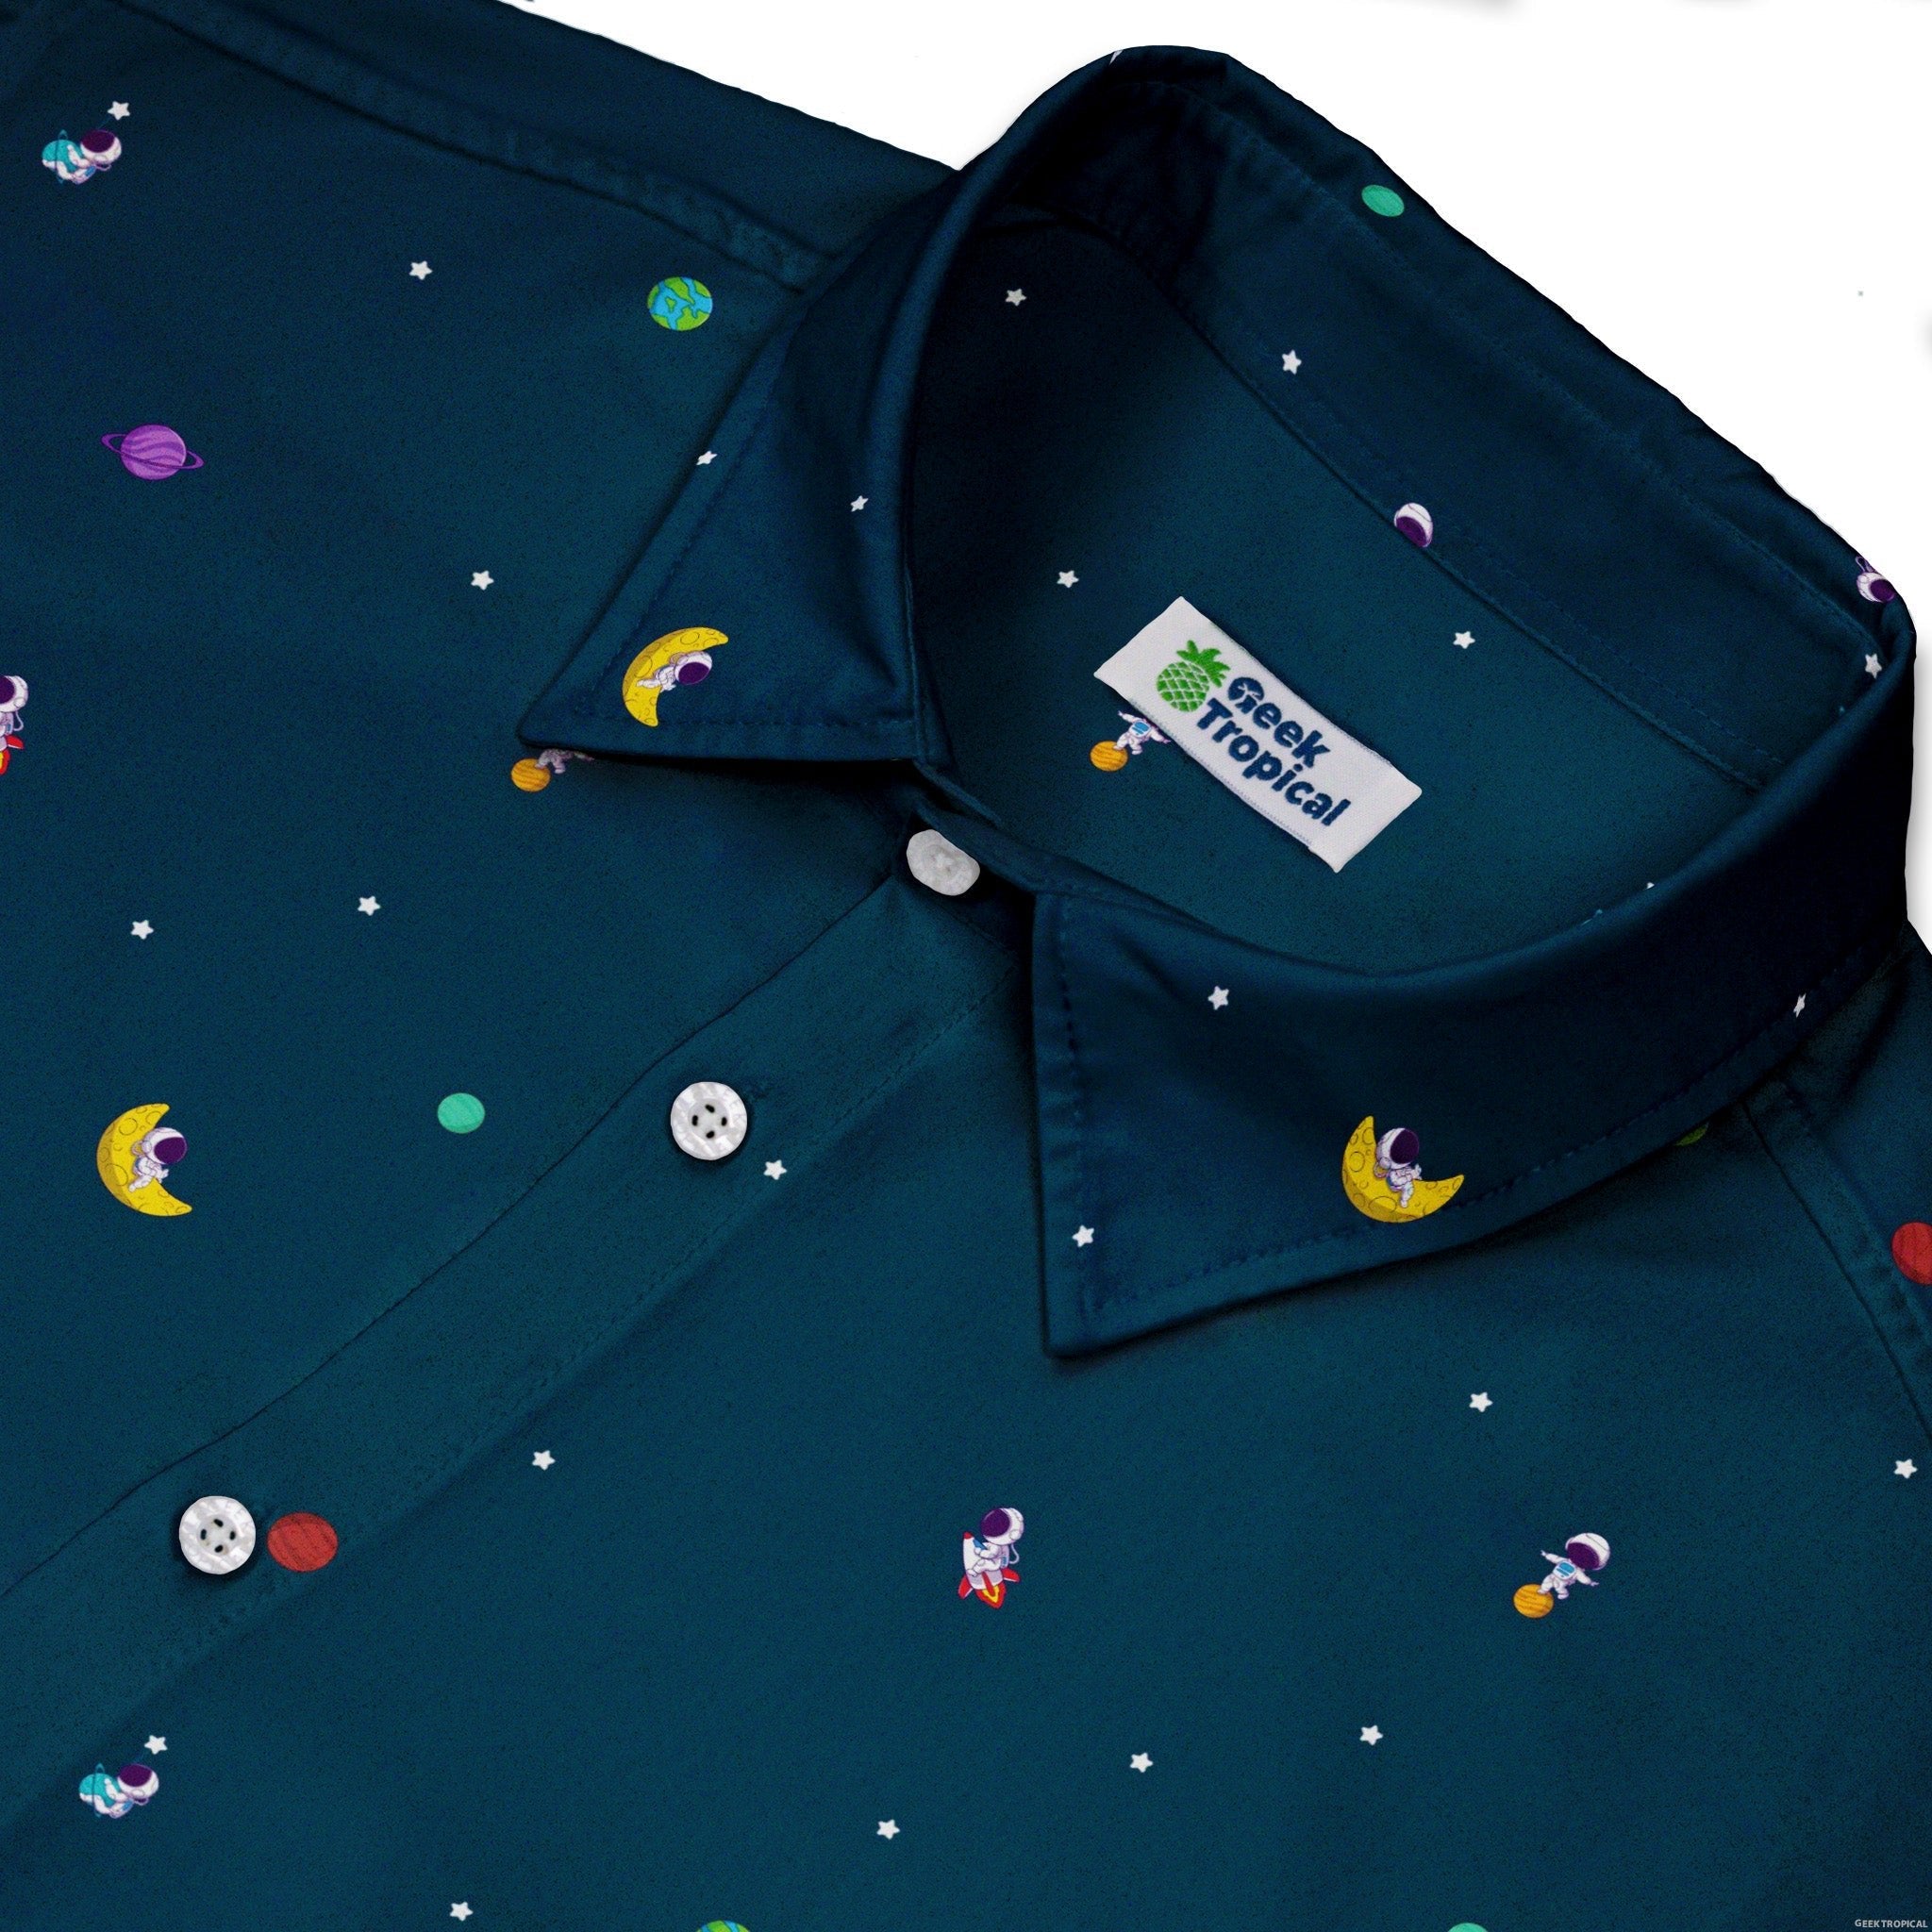 Astro Boy Space Button Up Shirt - adult sizing - outer space & astronaut print - Simple Patterns